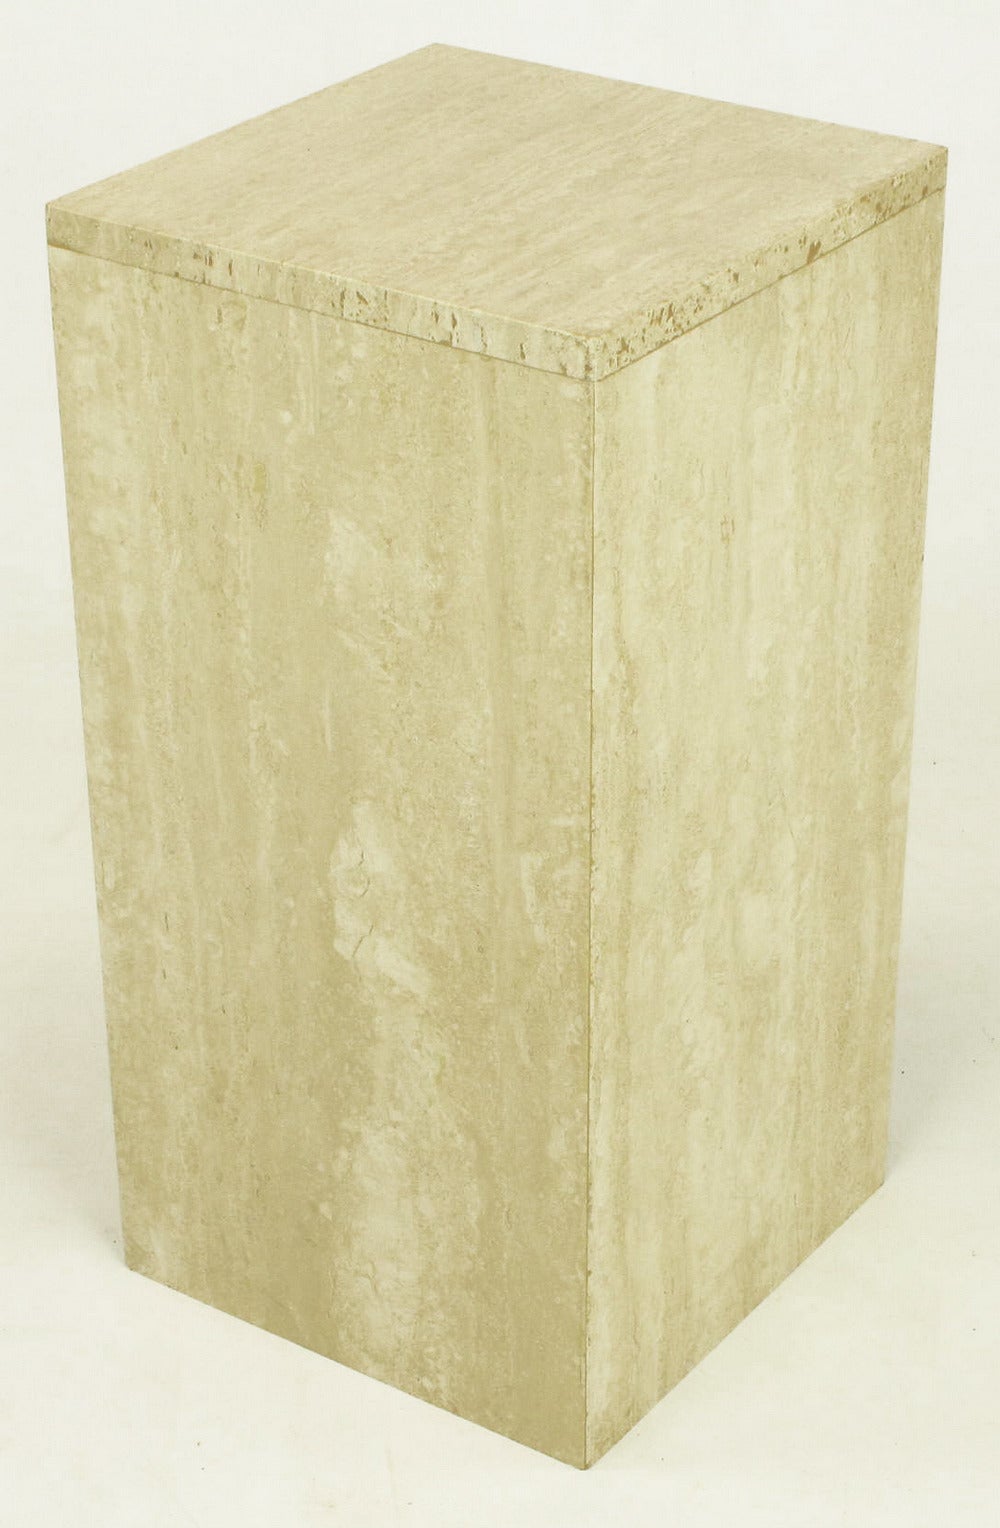 Beautifully veined travertine pedestal side tables. Versatile pair can be used as pedestals, tables or with a piece of glass bridging the two, a console table.